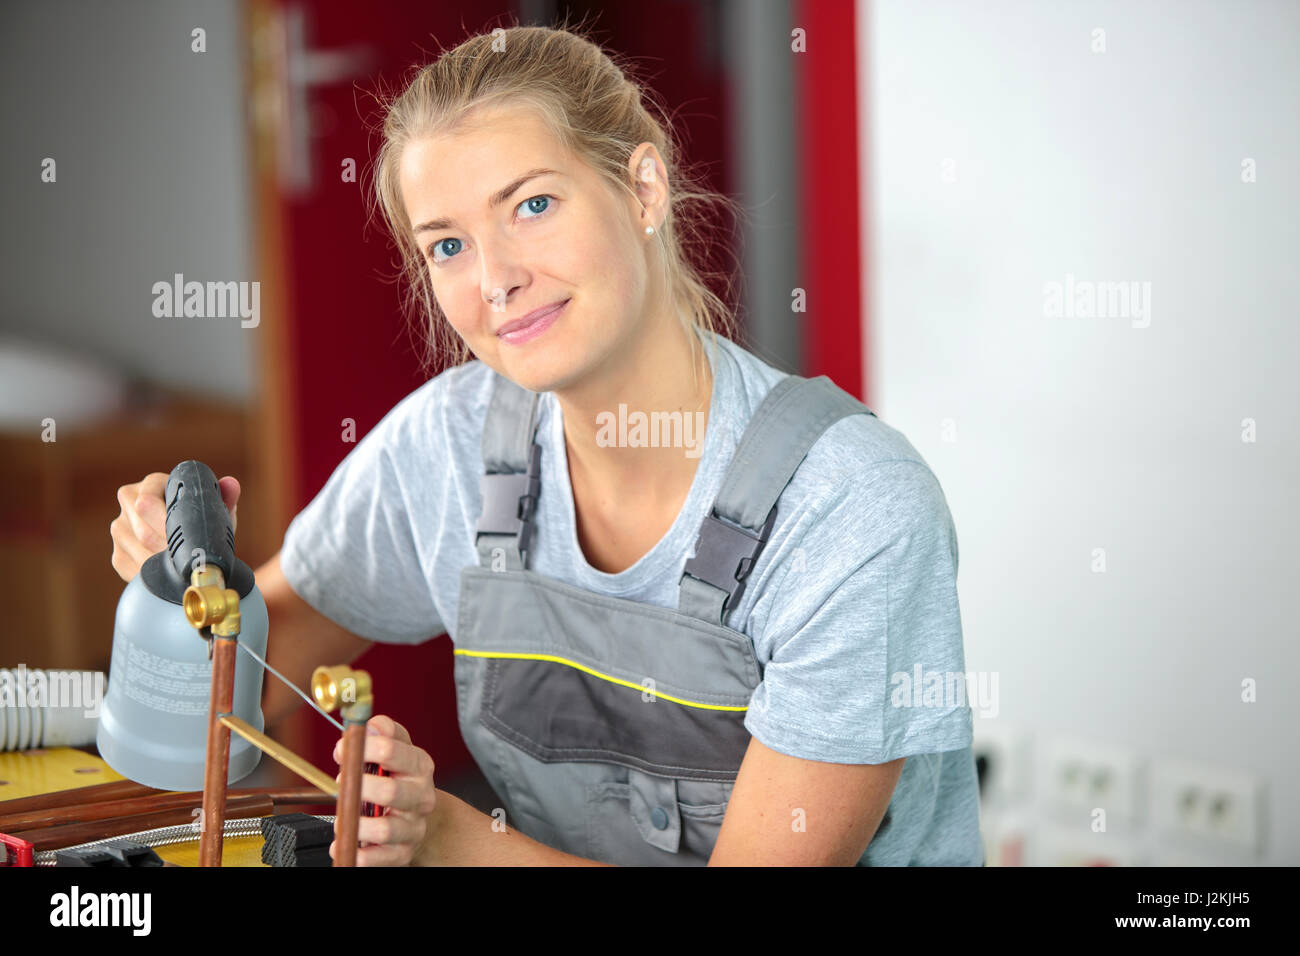 Female worker heating copper pipe Stock Photo